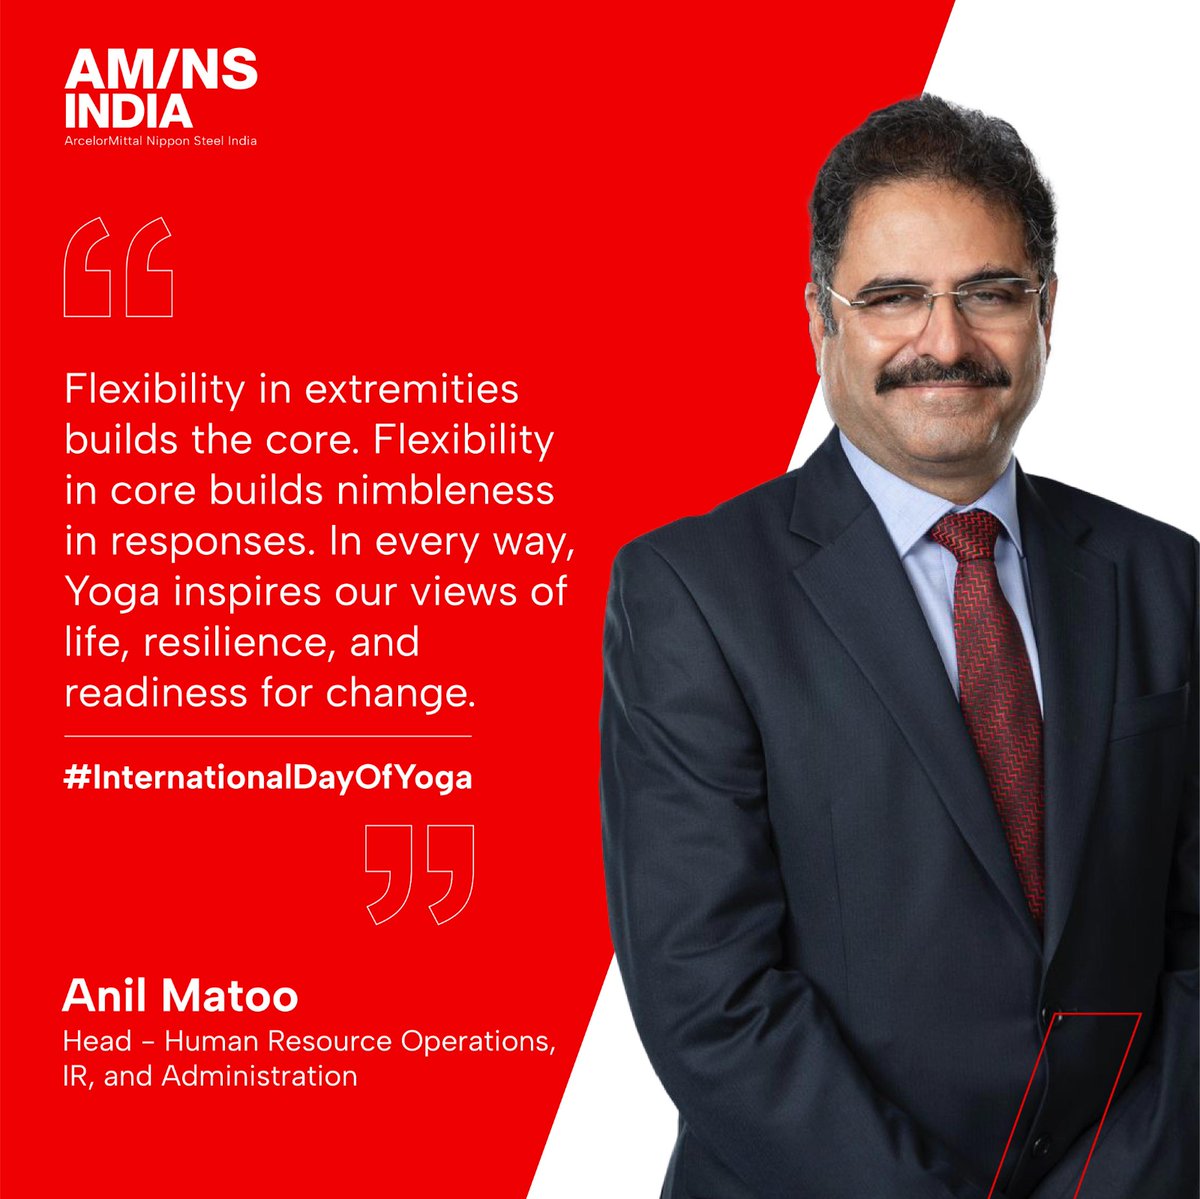 On this #InternationalYogaDay, let's embrace the spirit of pushing our limits, challenging boundaries, & creating new opportunities by stretching beyond what was once thought possible. By cultivating flexibility in both our minds and bodies, we pave the way for #BrighterFutures.